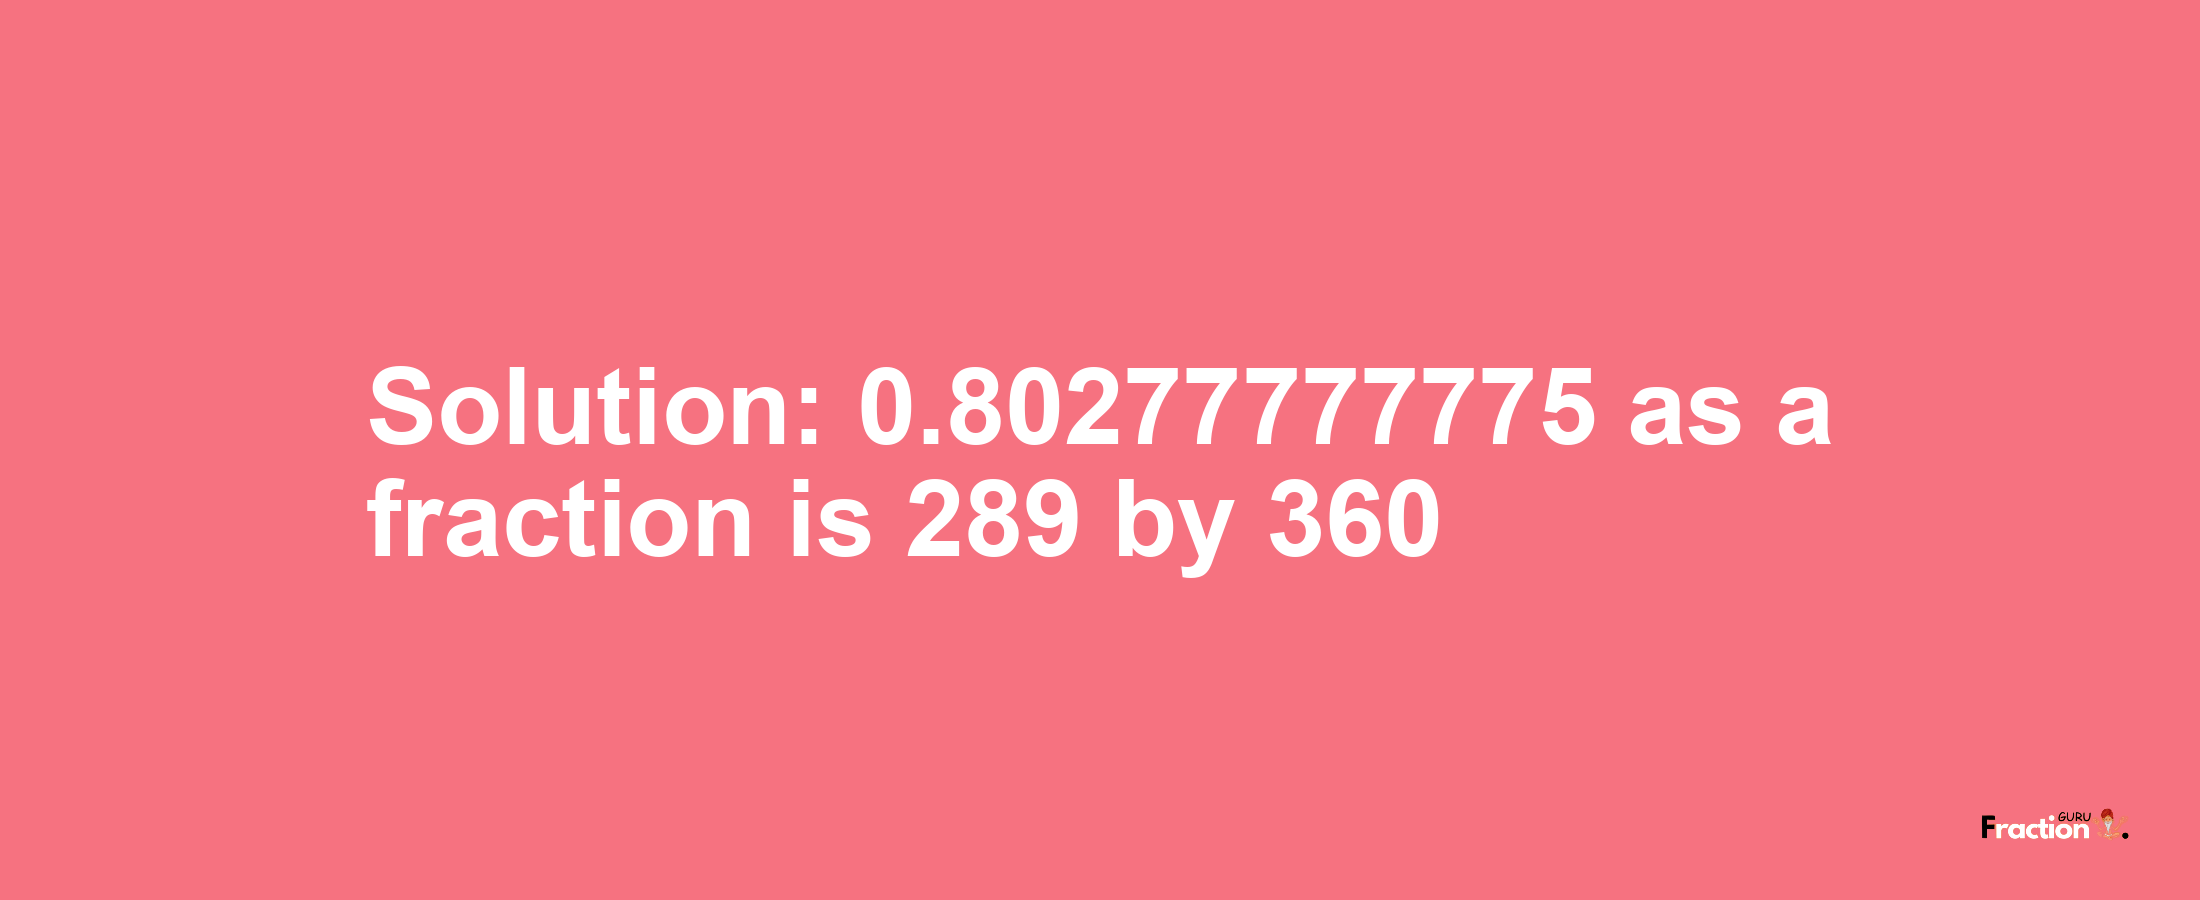 Solution:0.80277777775 as a fraction is 289/360